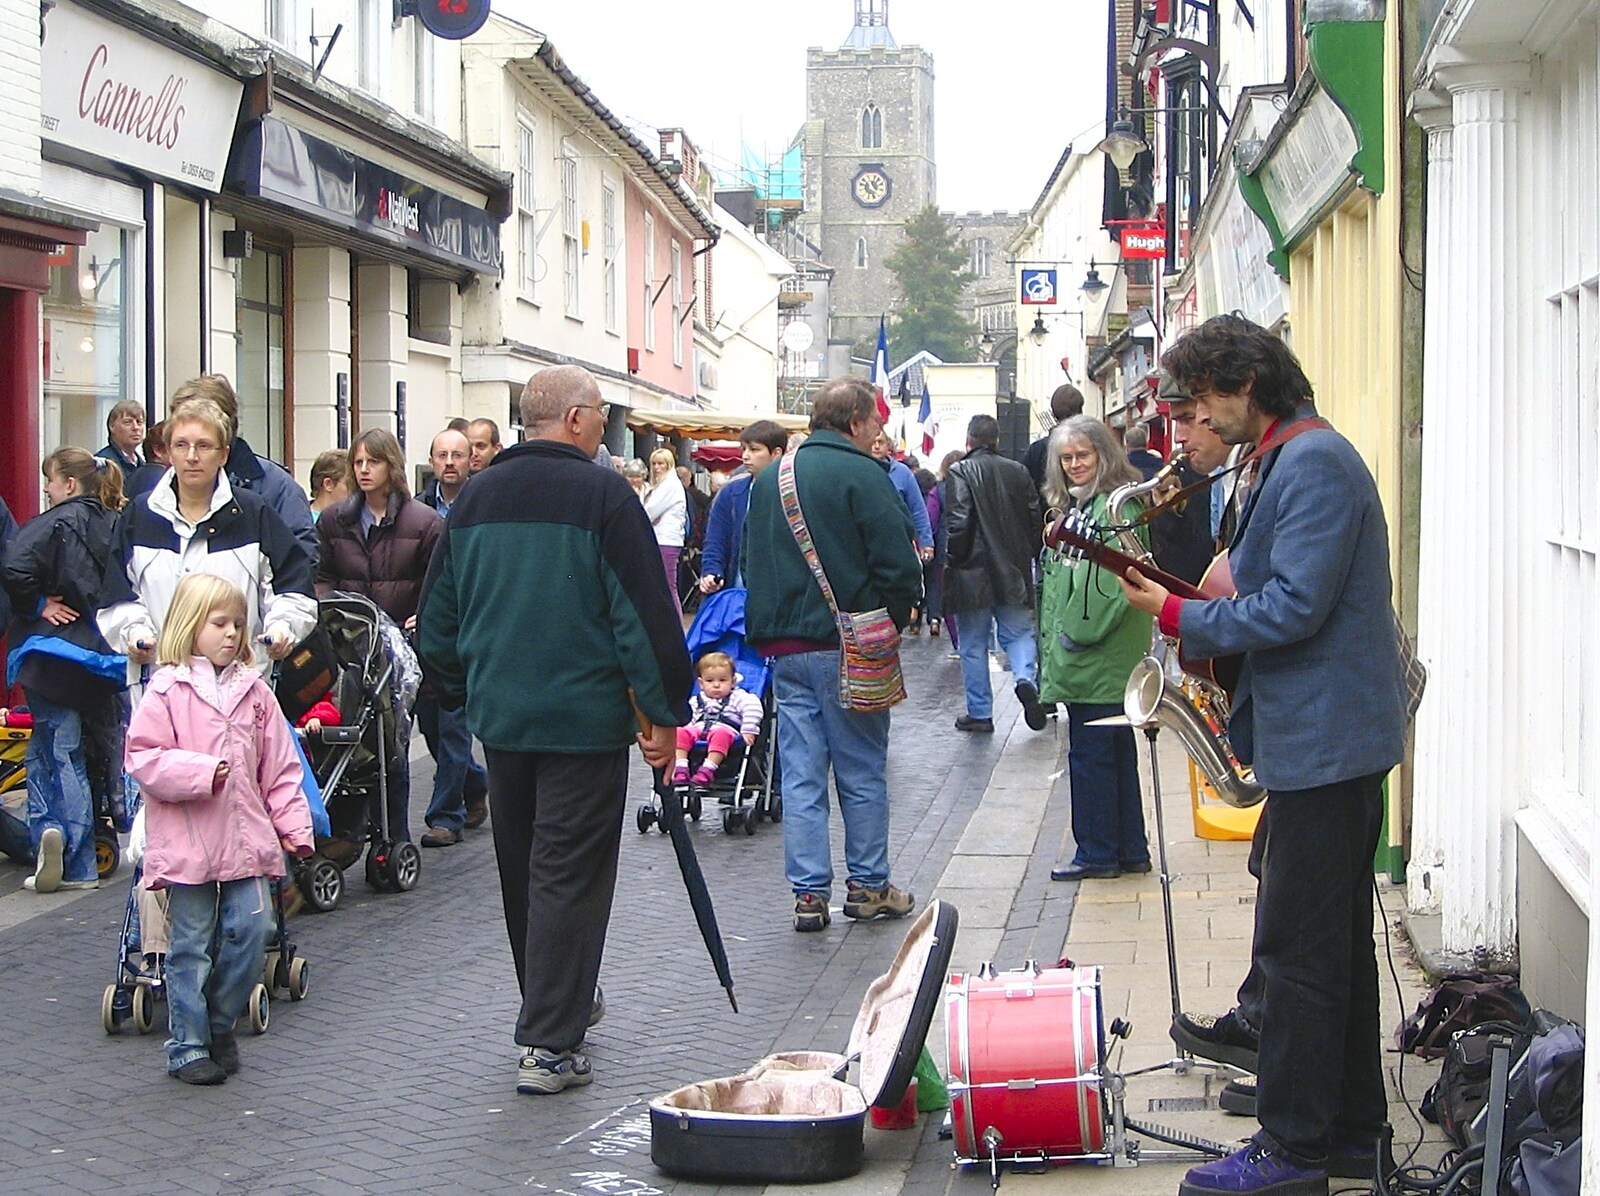 Swervy World do some busking on Mere Street from A French Market, Blues and Curry, Diss, Scole and Brome - 17th October 2004